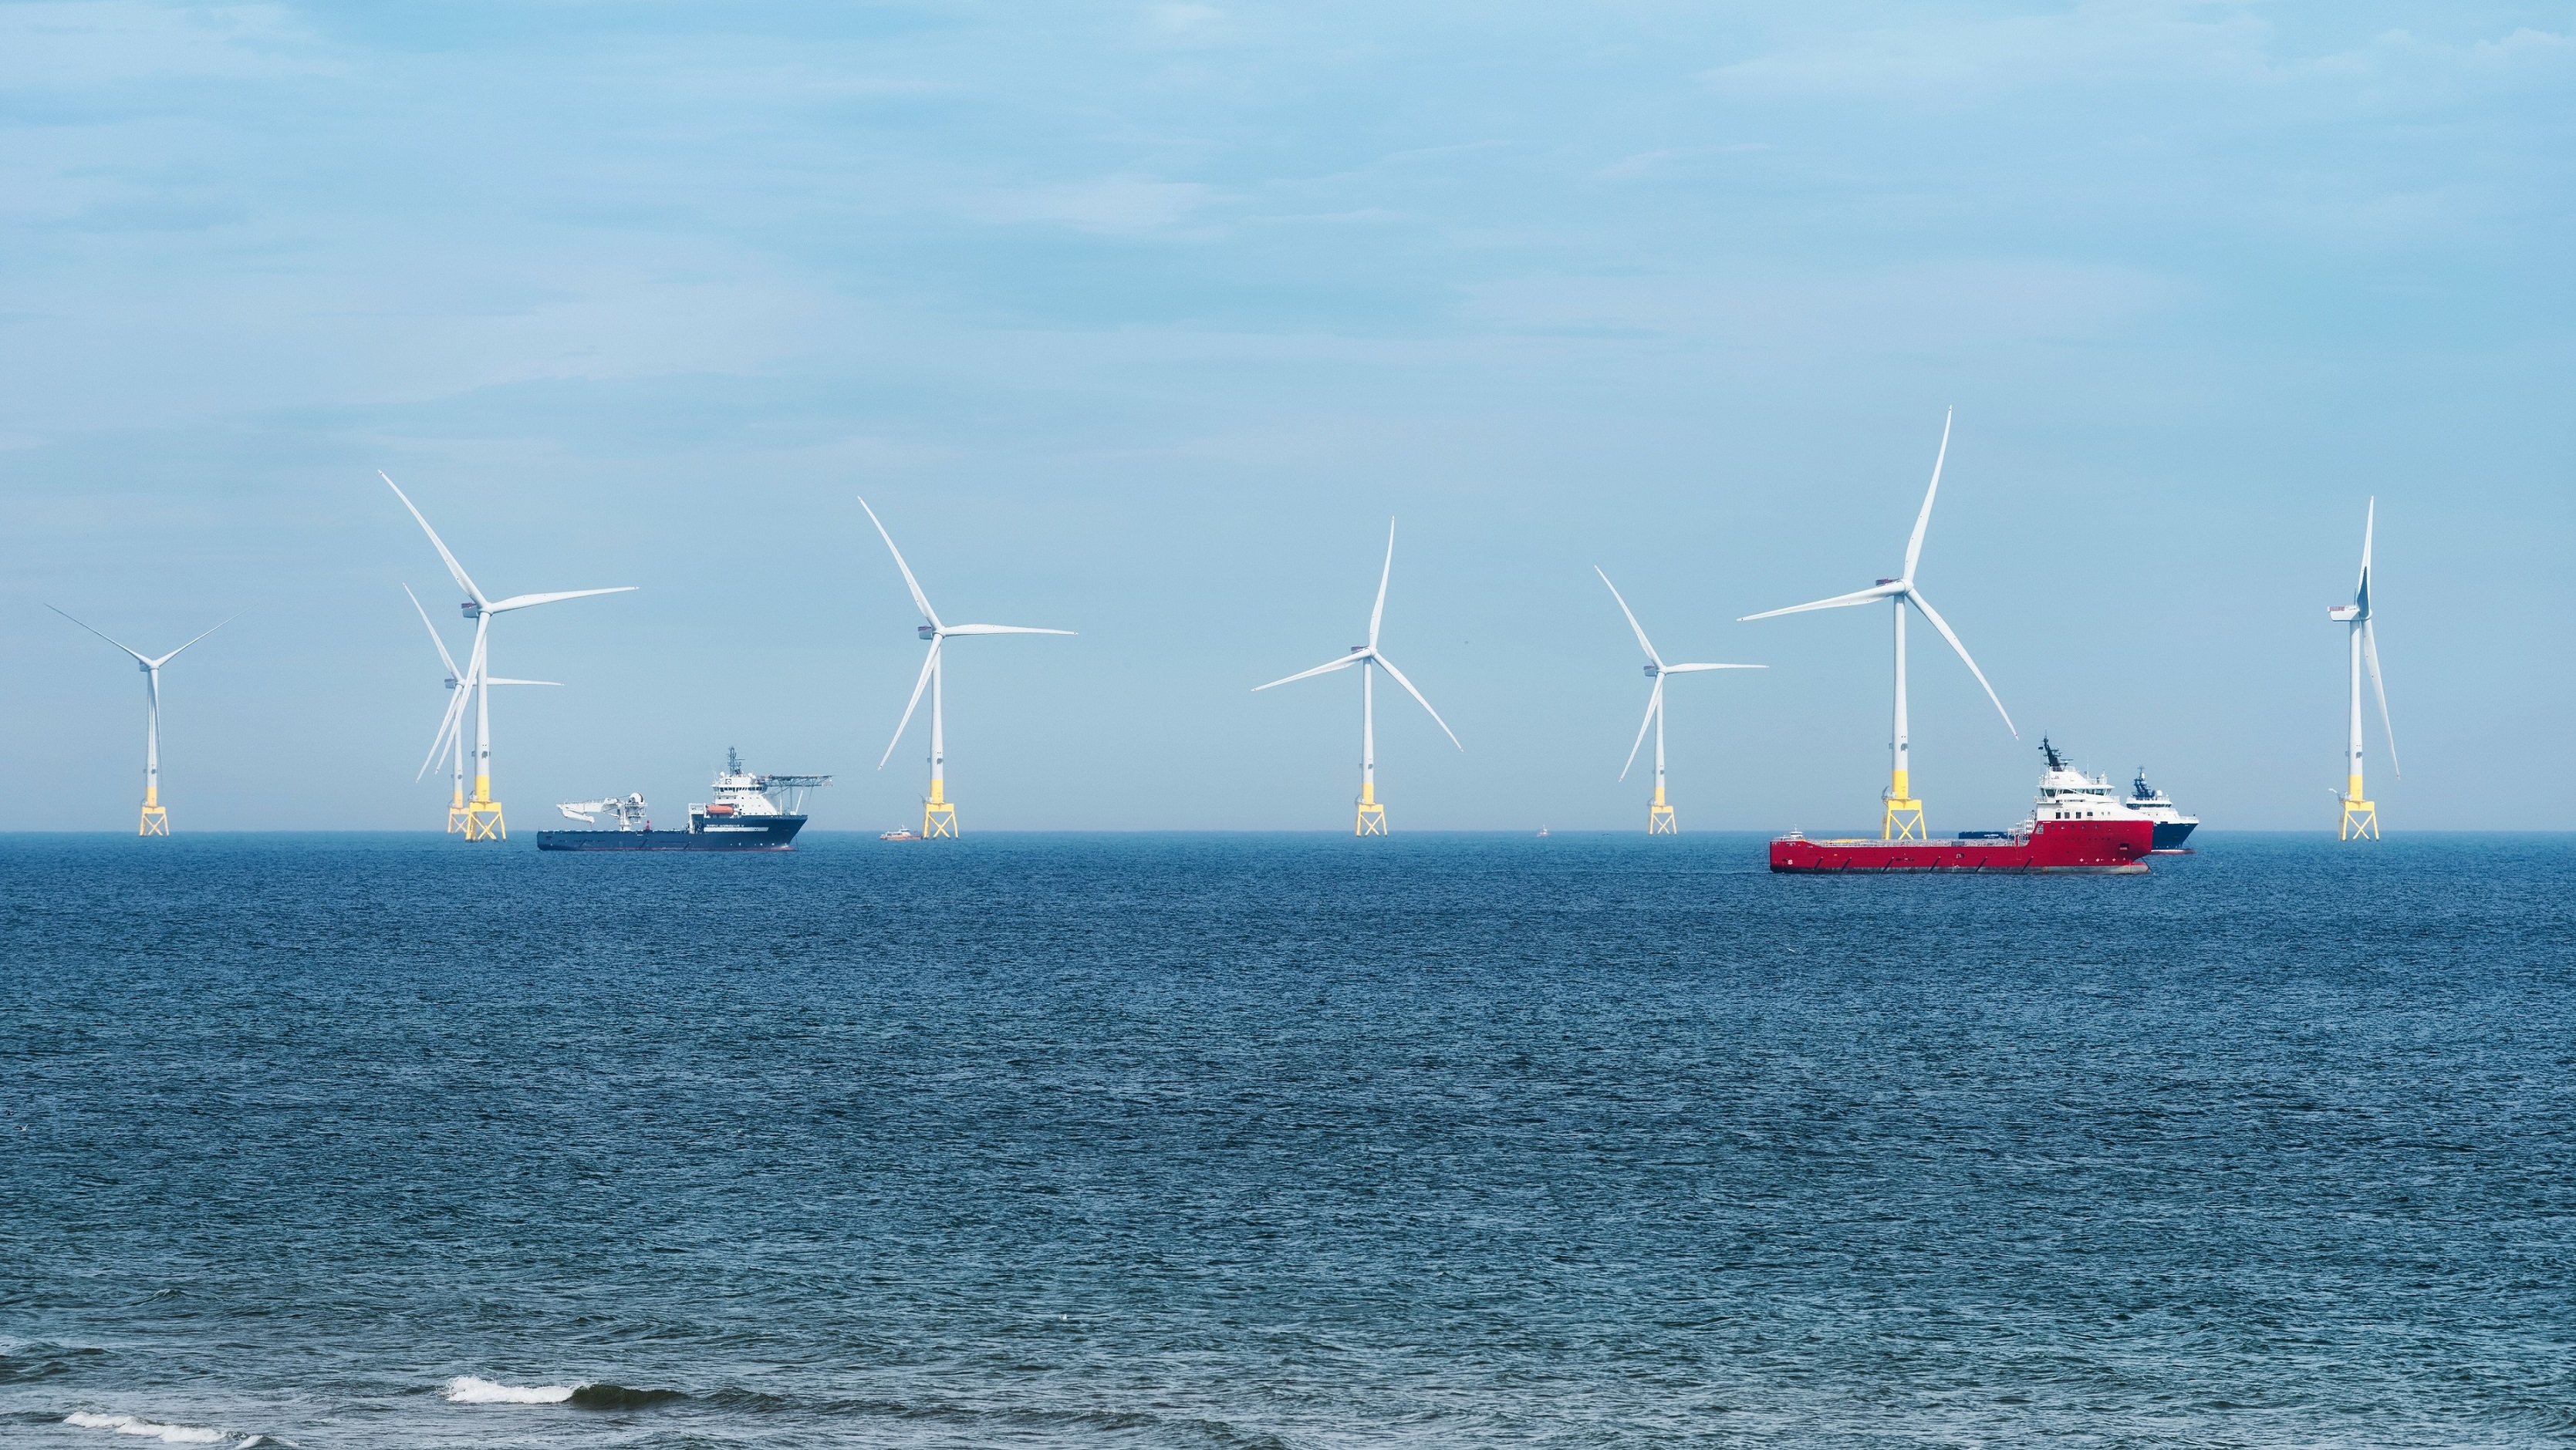 Ocean Winds sells 16.6% stake in Moray East Offshore Wind Farm to Equitix